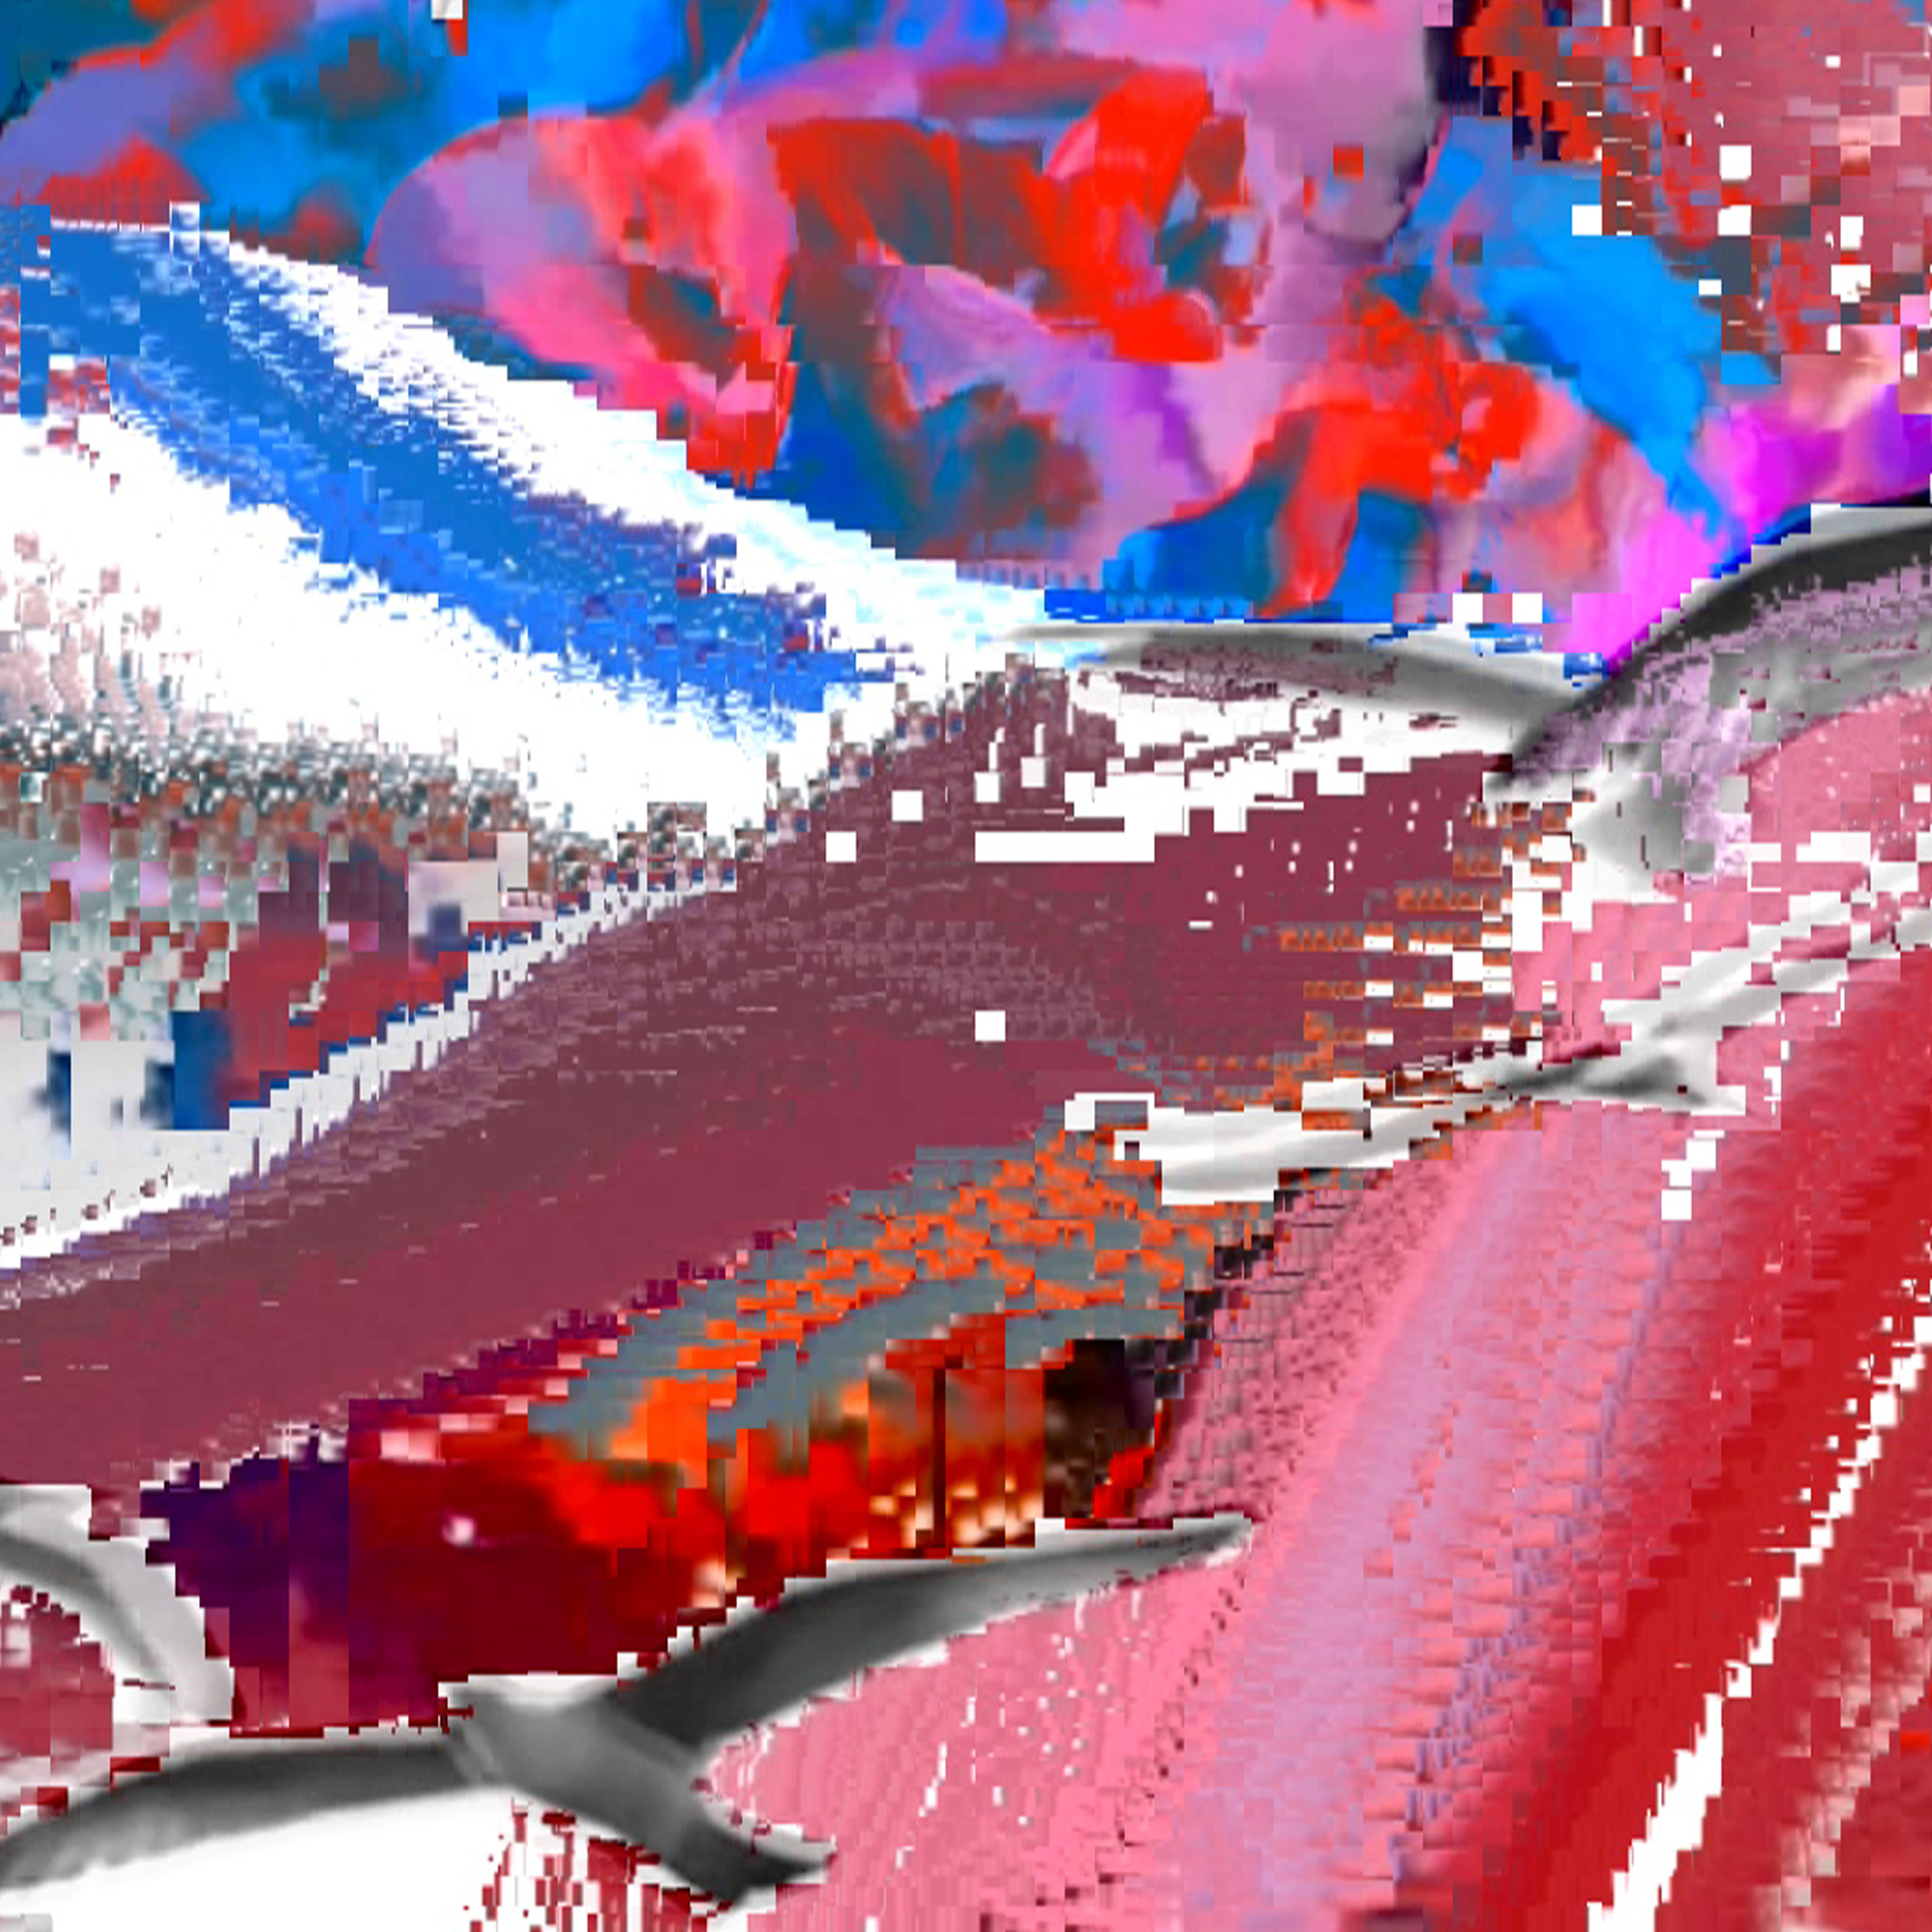 Detail from the digital film showing a bird in flight against a pixelated background